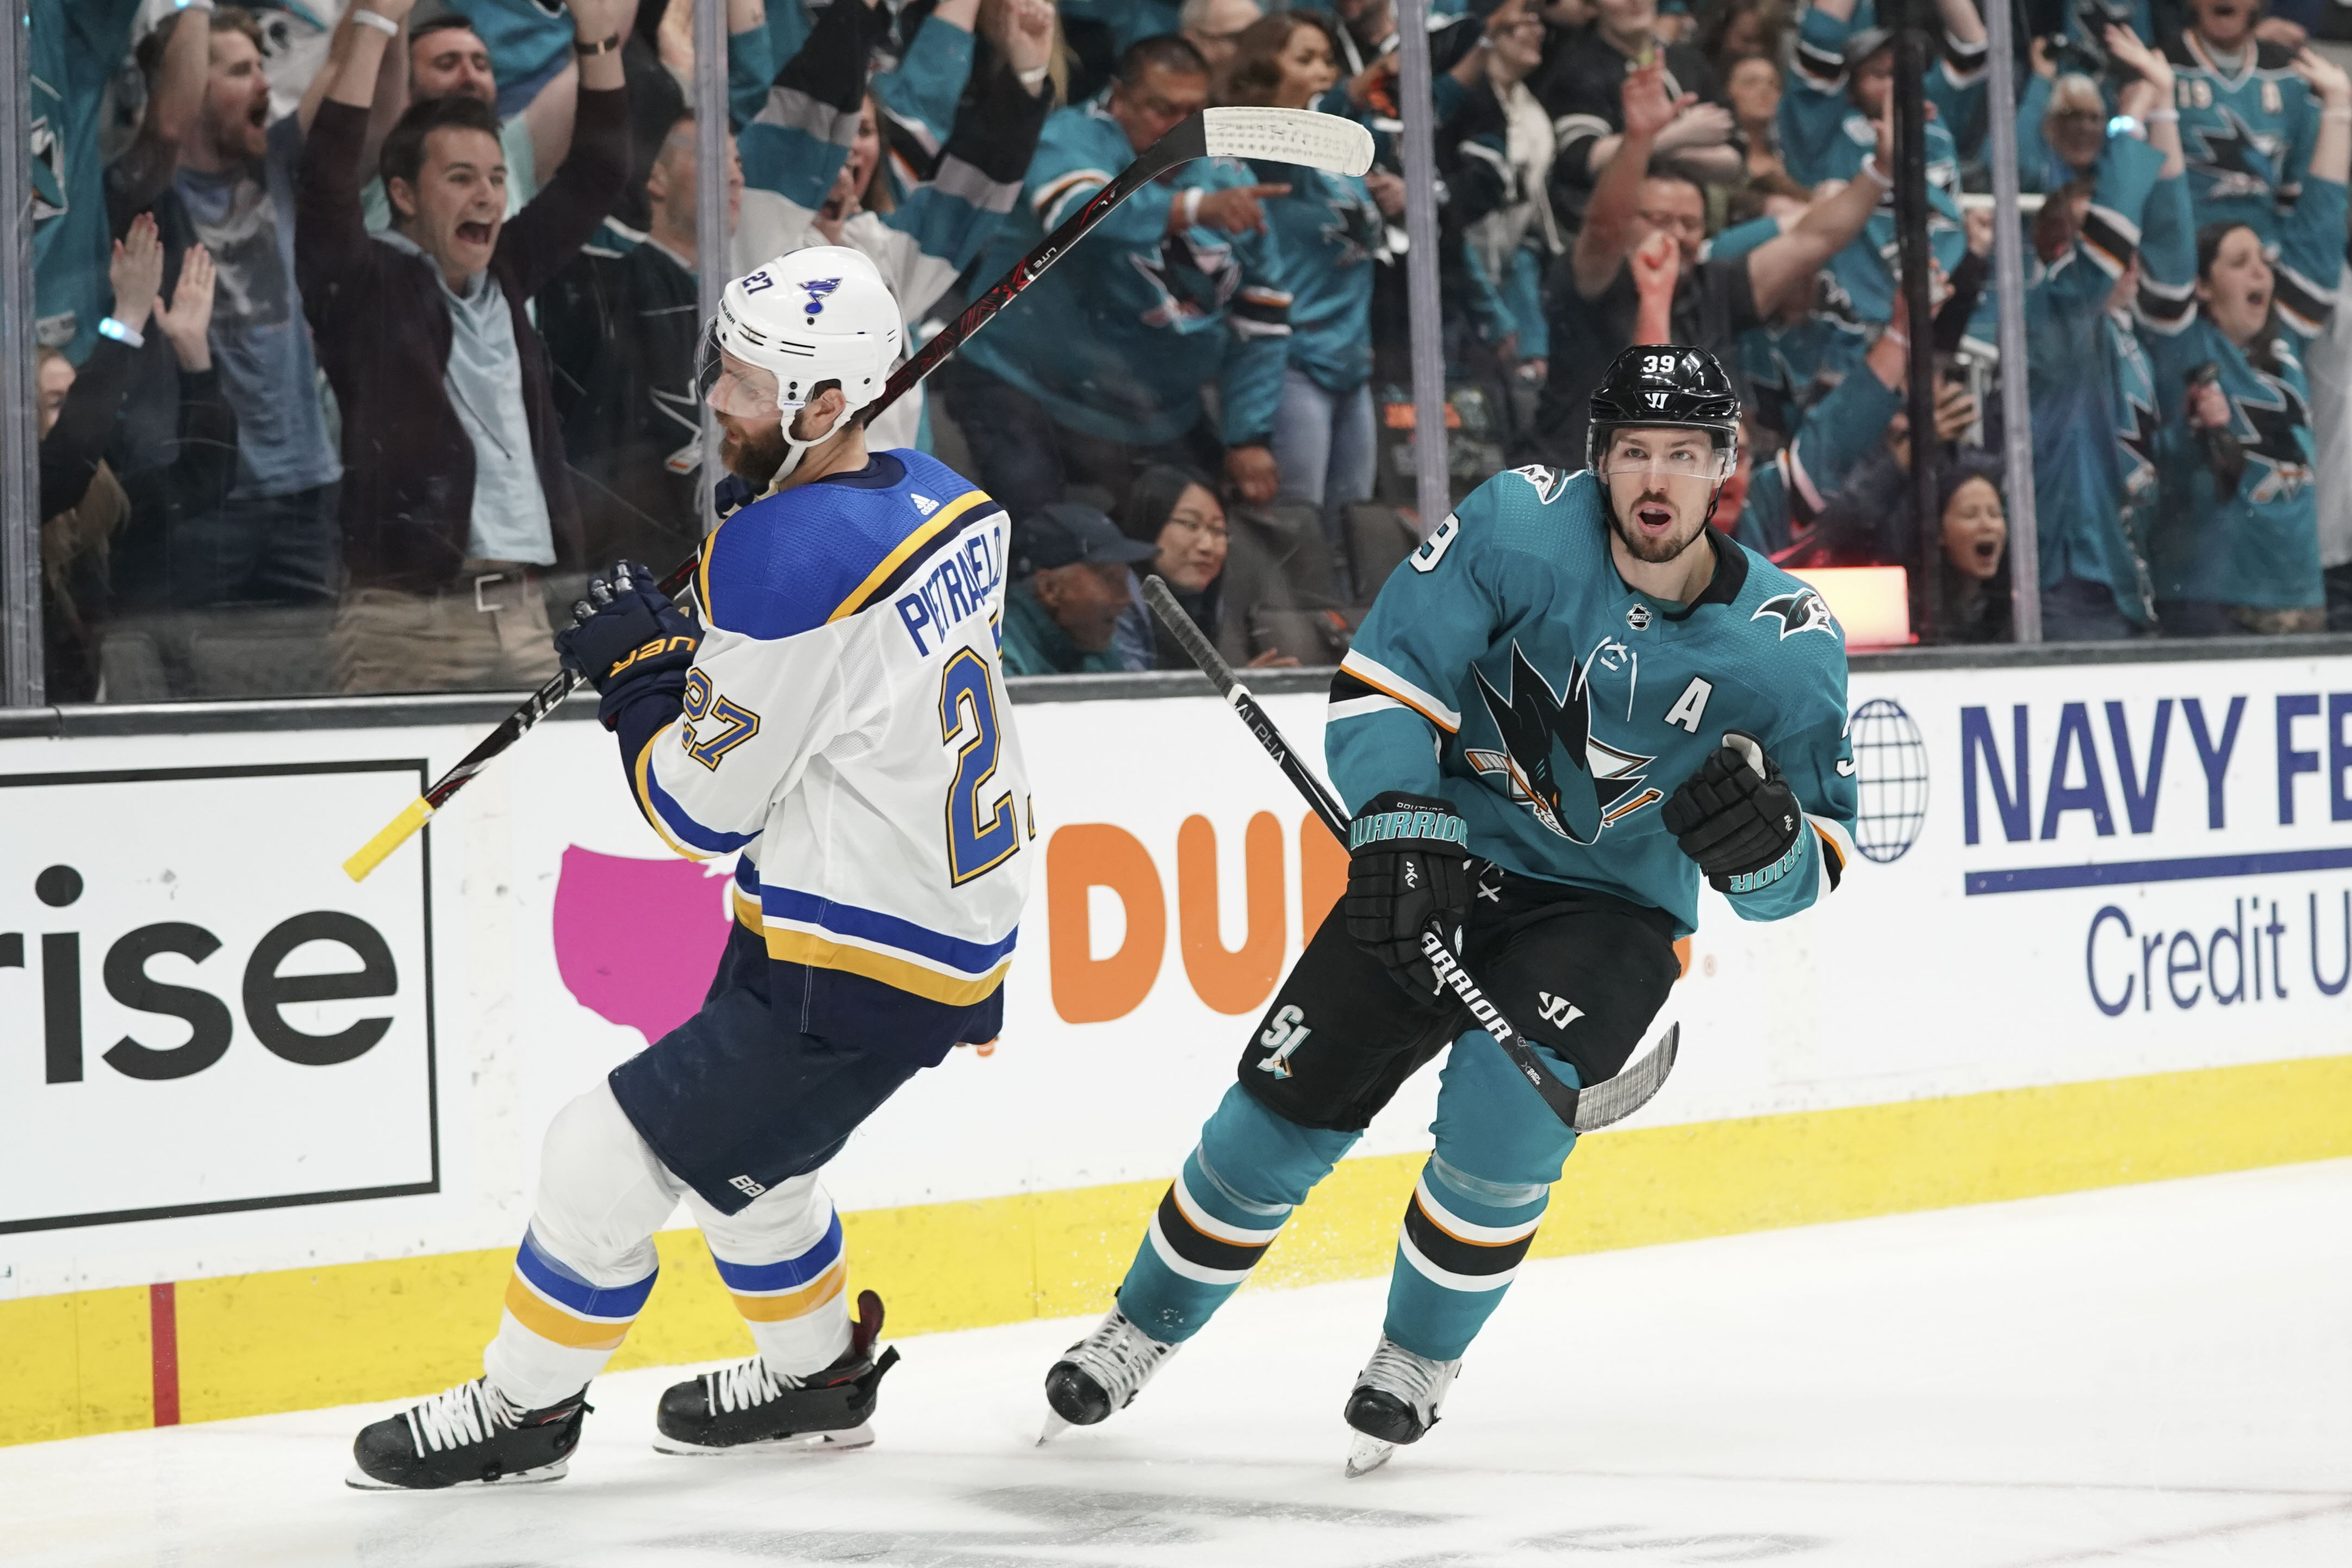 2019-05-12T010858Z_977696309_NOCID_RTRMADP_3_NHL-STANLEY-CUP-PLAYOFFS-ST-LOUIS-BLUES-AT-SAN-JOSE-SHARKS